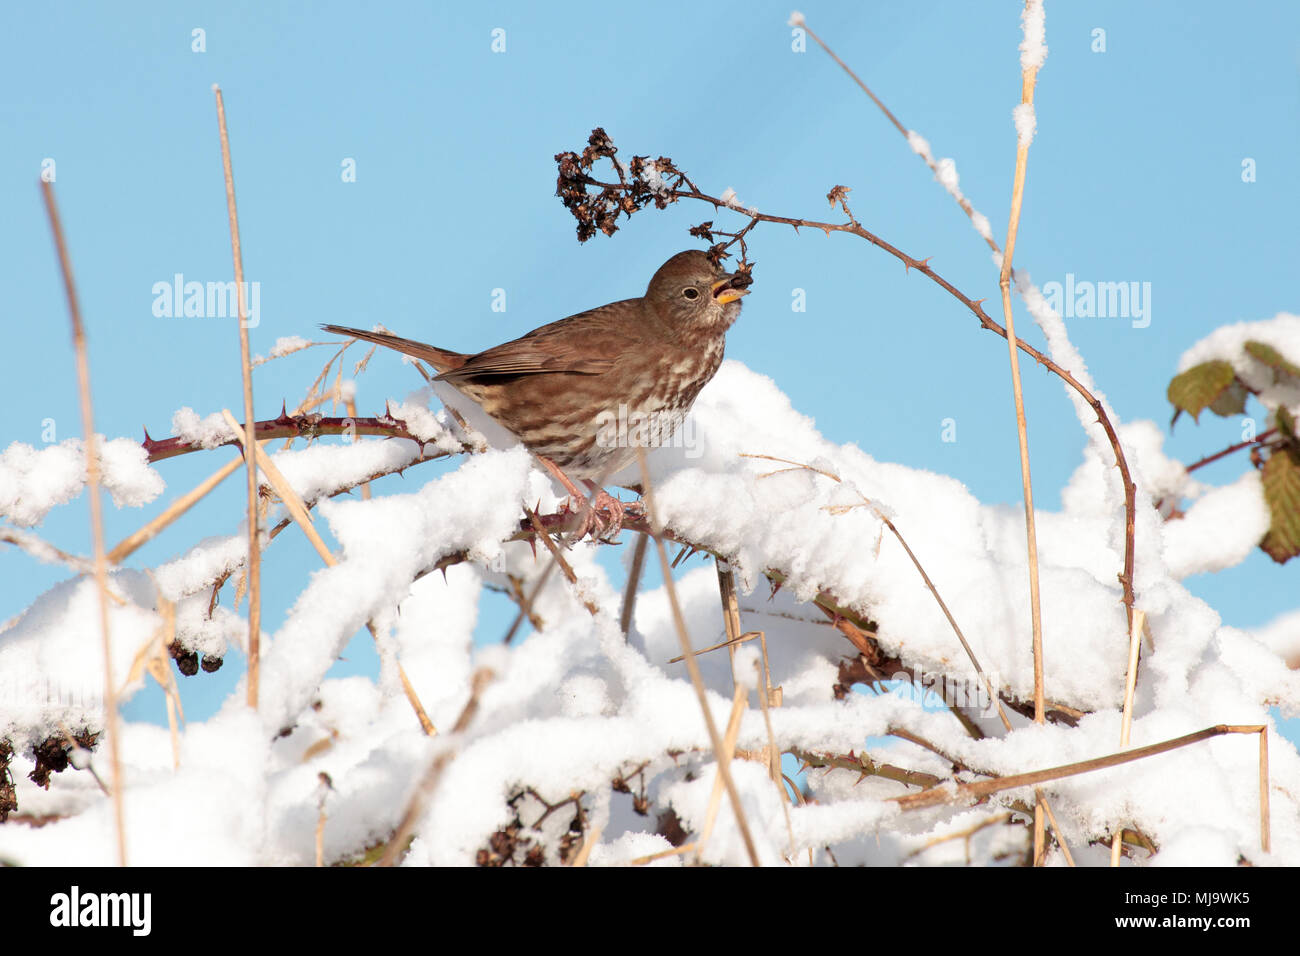 Small sparrow eating the seeds of a bush covered in the snow during winter, in Surrey Lake, British Columbia, Canada. Stock Photo